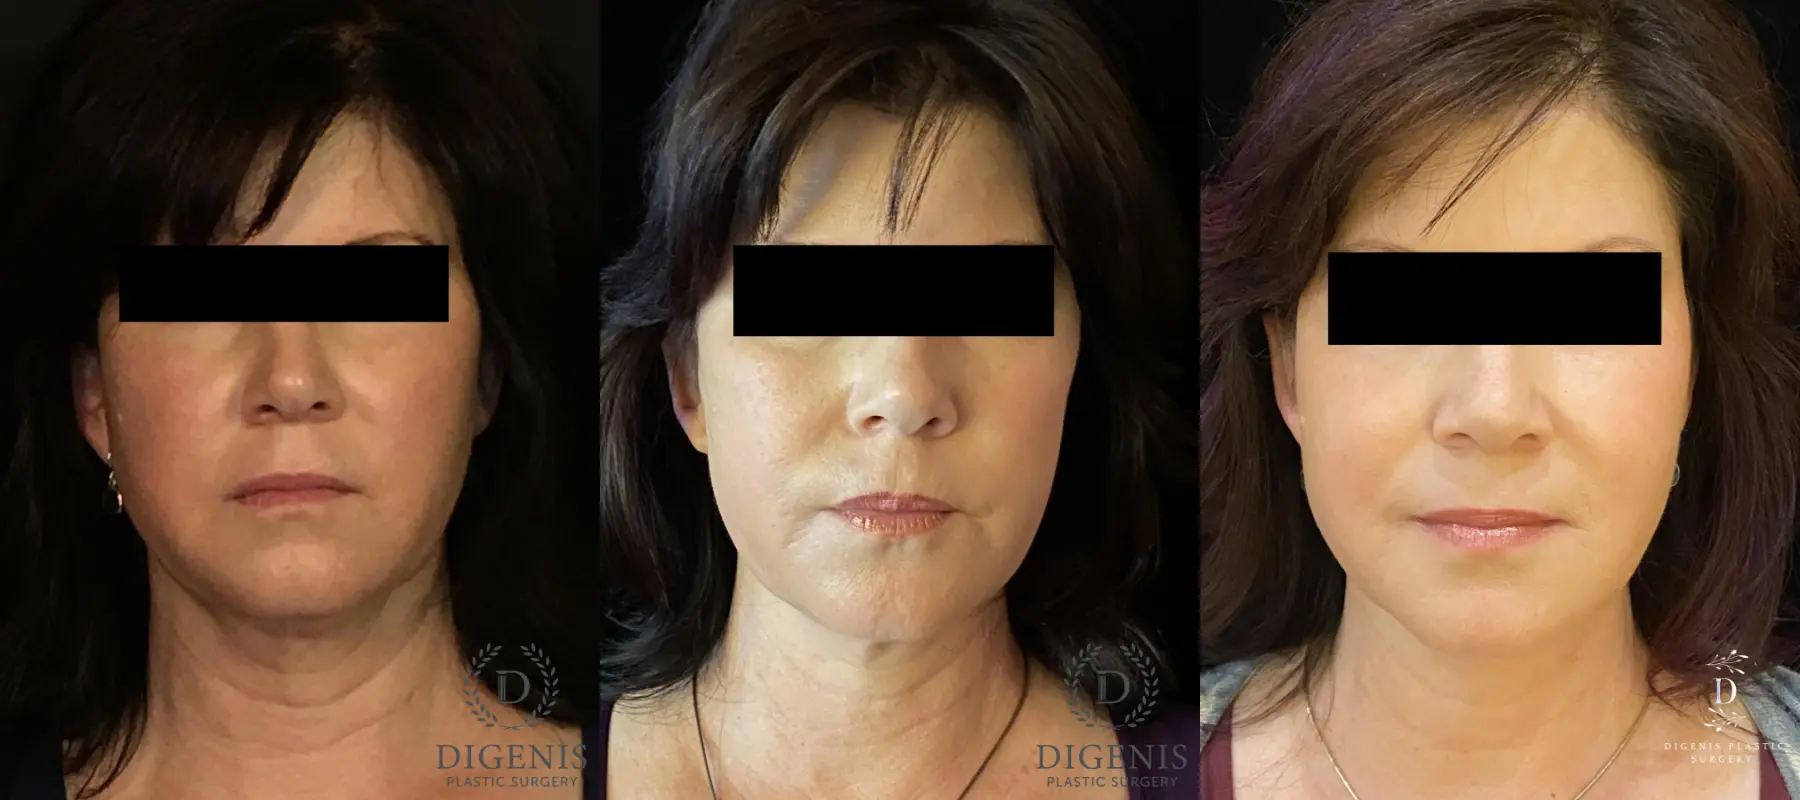 Digenis Refresh Lift: Patient 4 - Before and After  